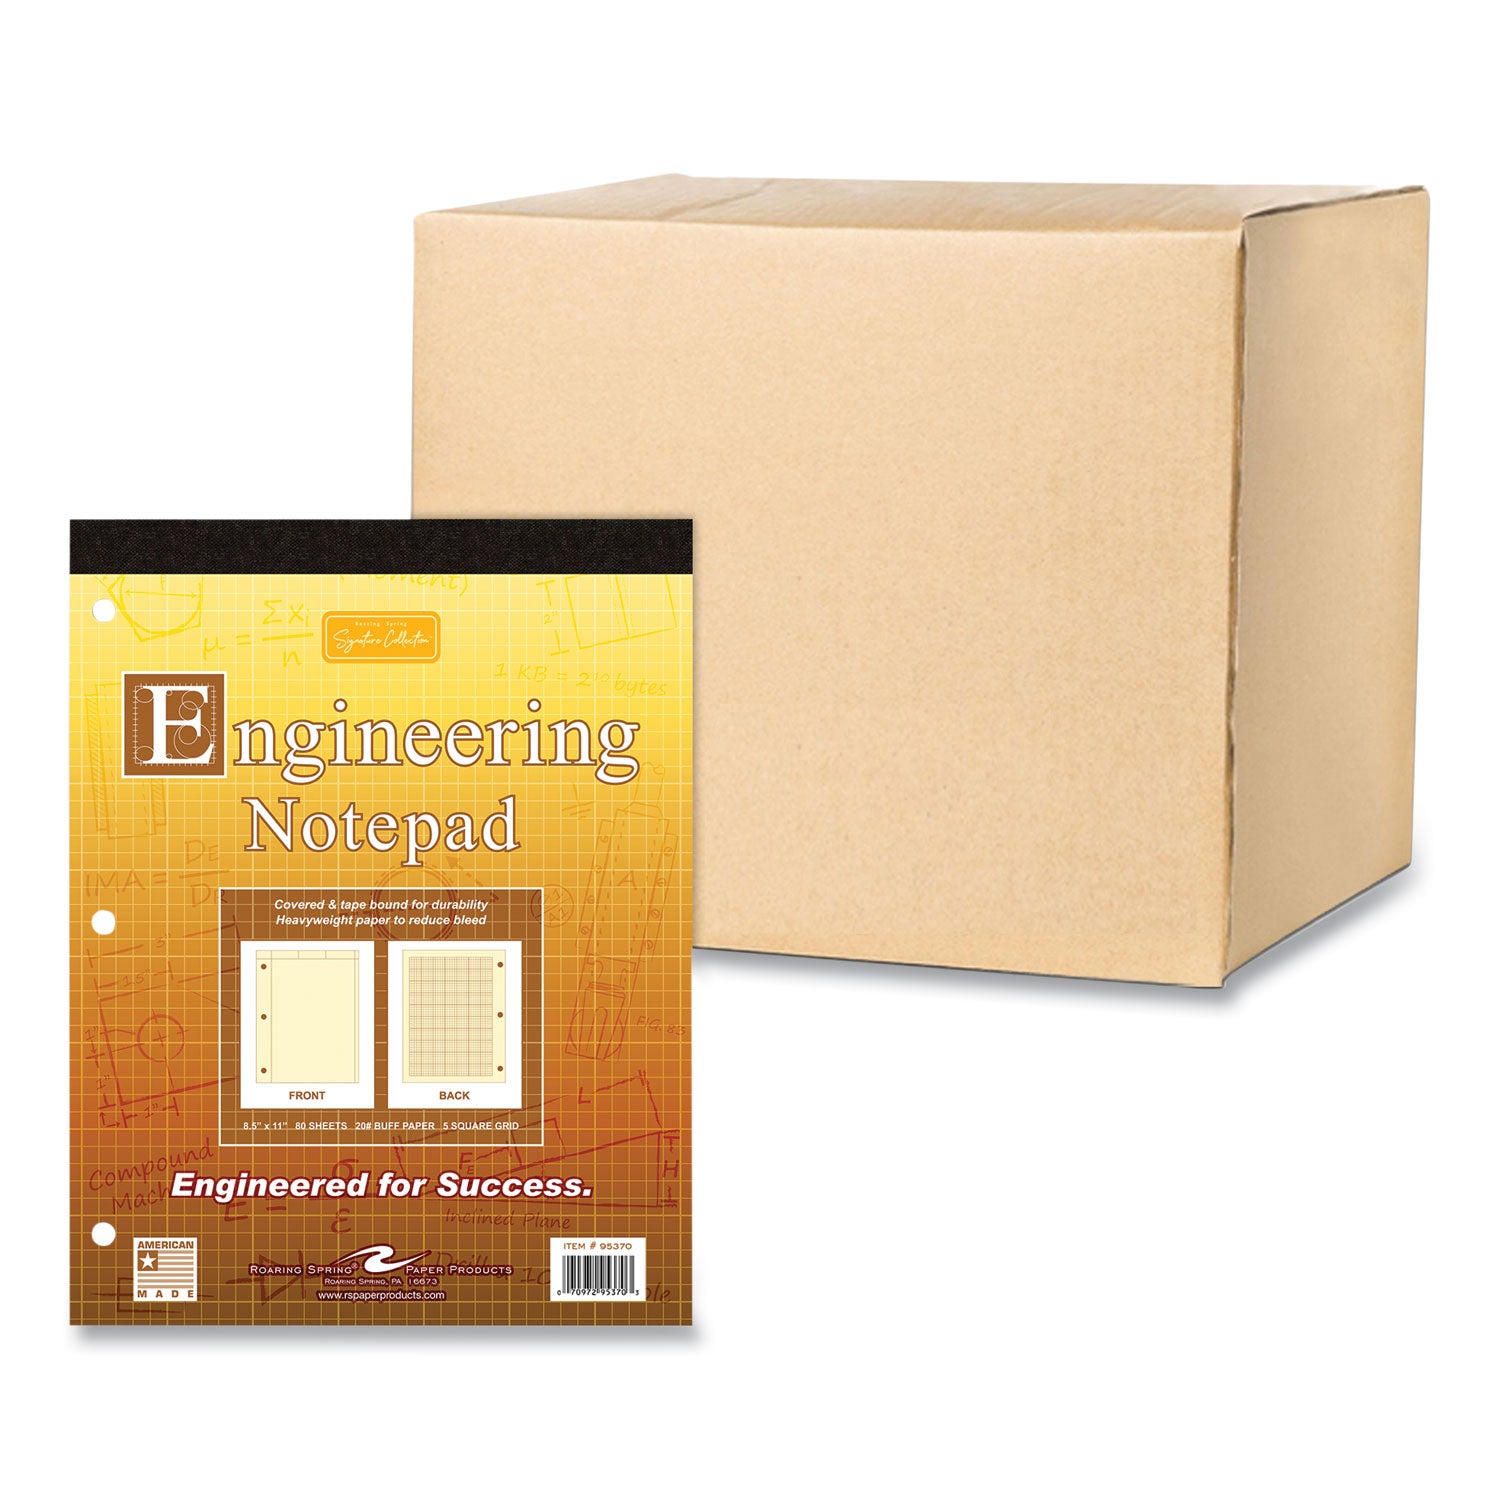 covered-engineering-pad-5-sq-in-quadrille-rule-80-buff-85-x-11-sheets-24-carton-ships-in-4-6-business-days_roa95370cs - 2